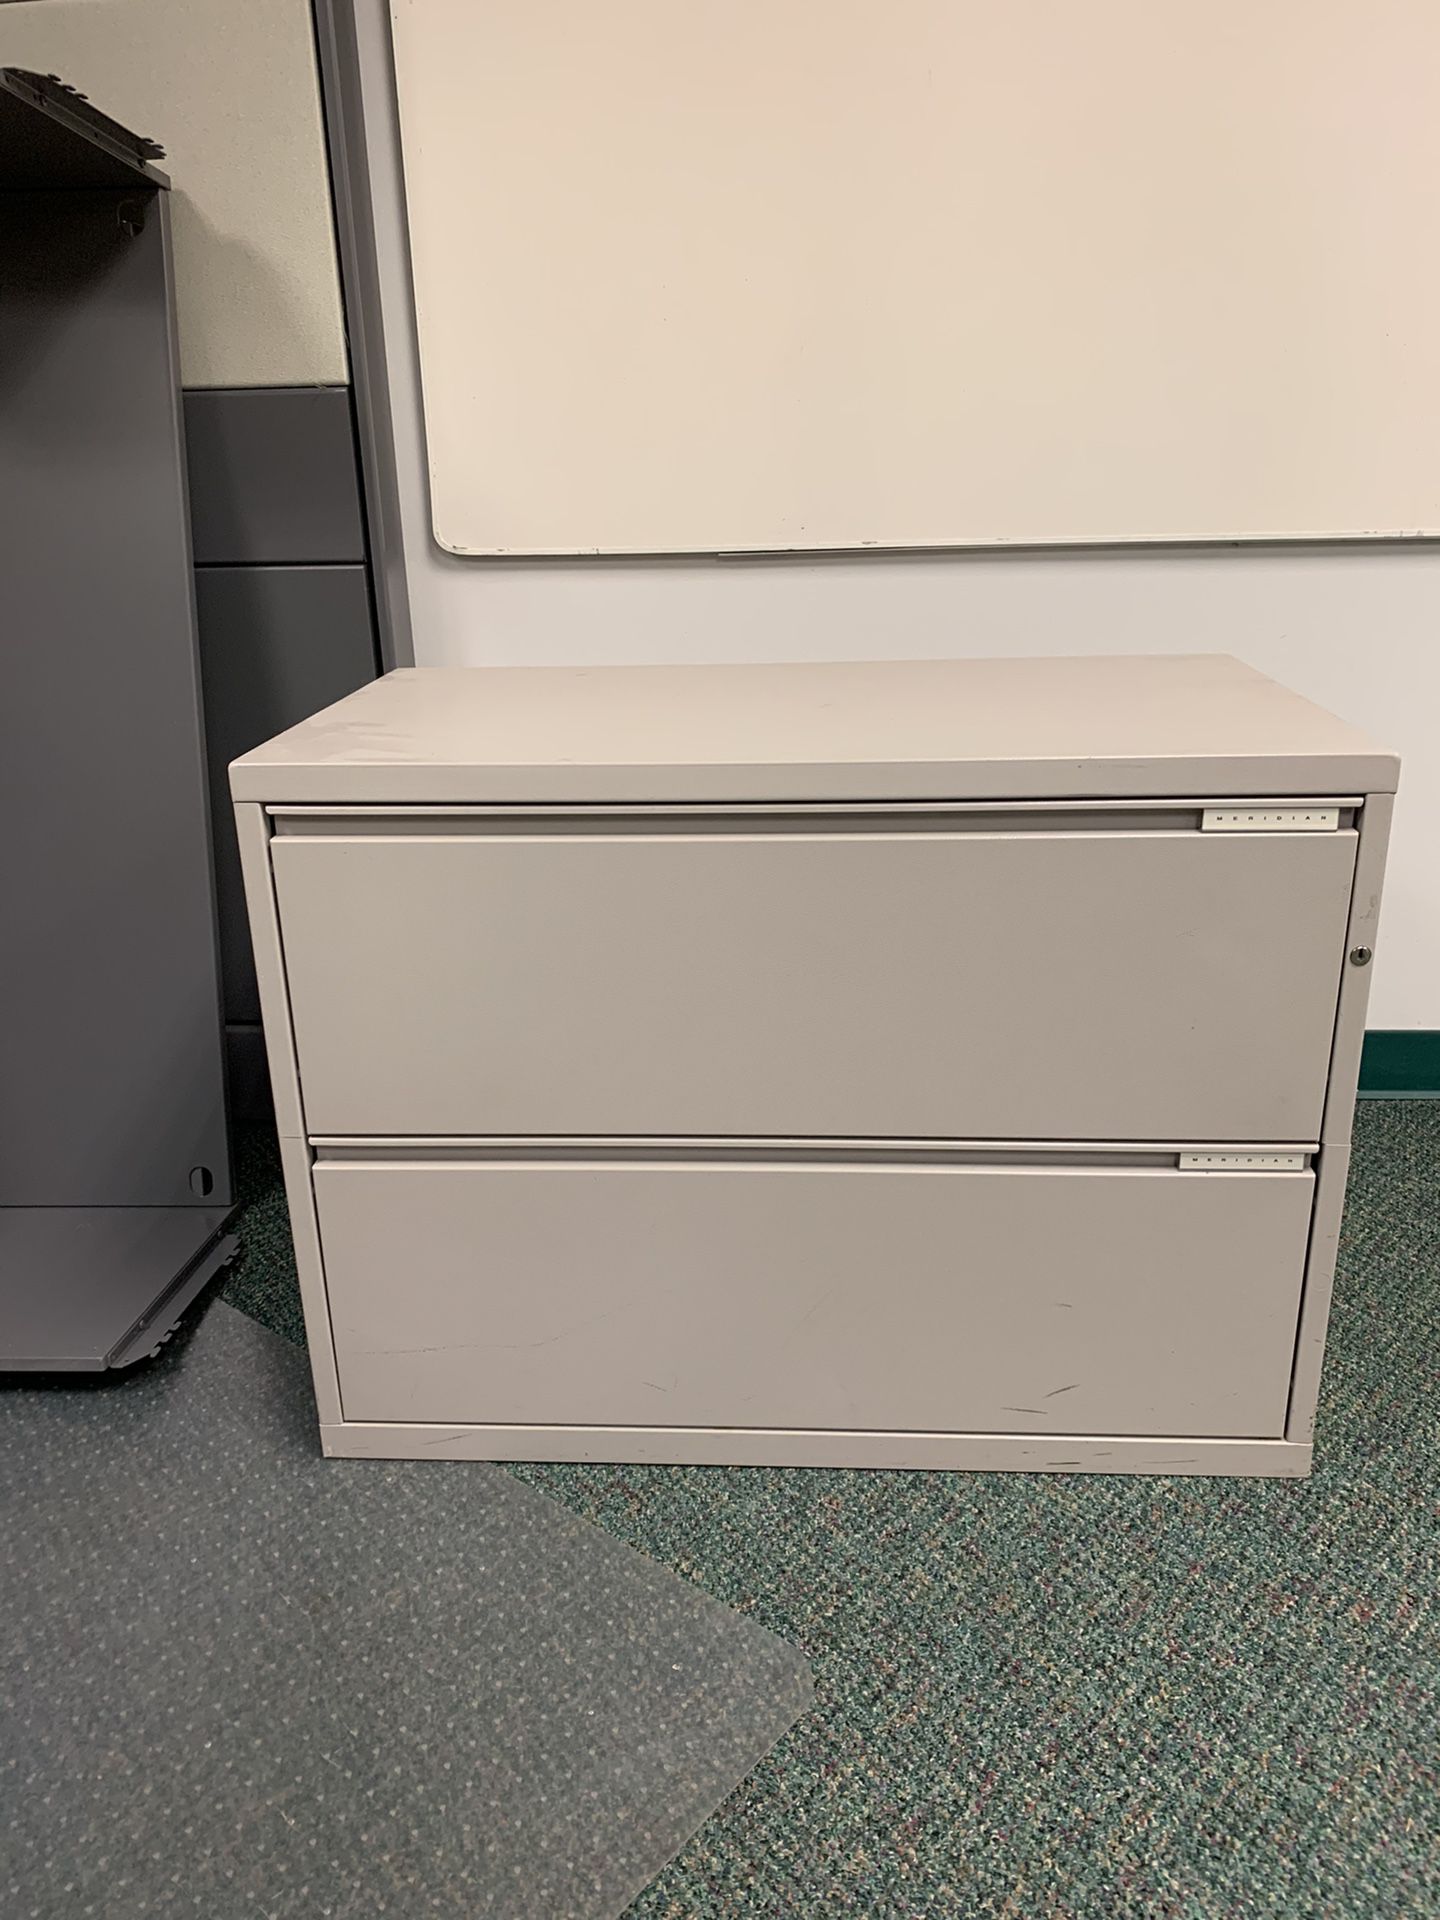 FREE file cabinets (10) take as many as you want